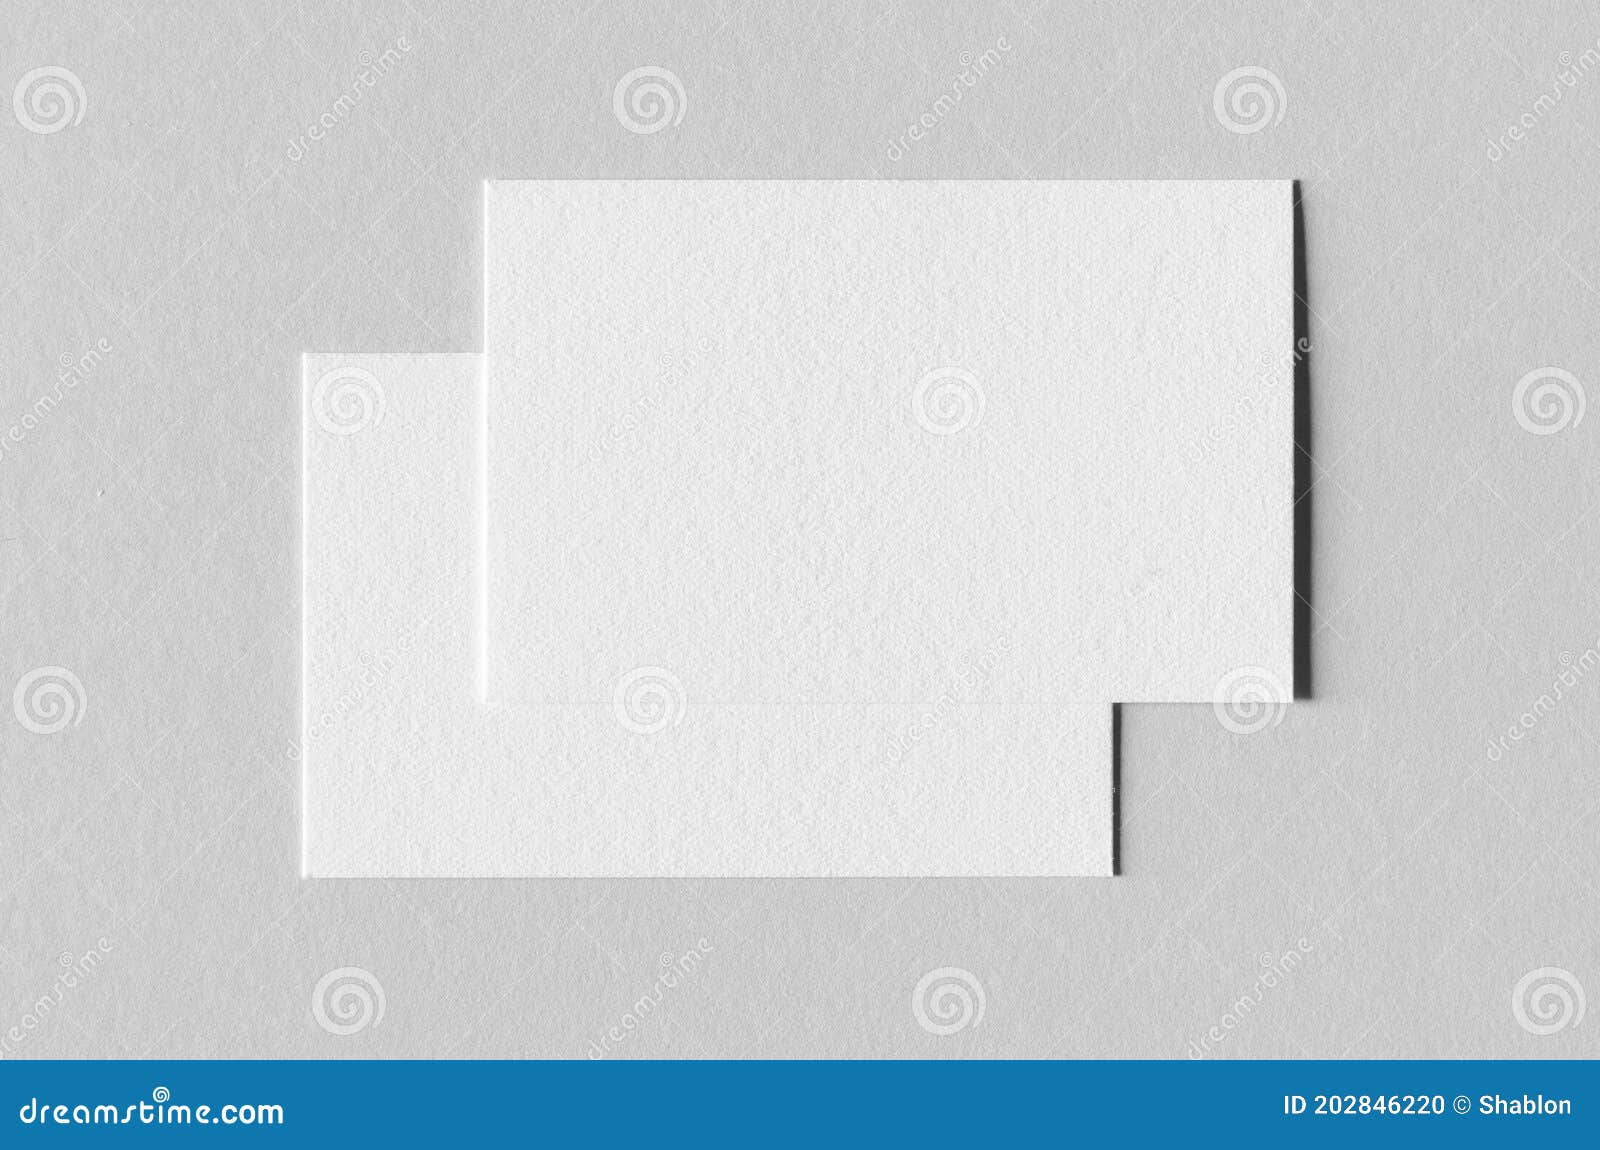 Download Textured Business Card Mockup On A Grey Background 85x55 Mm Stock Photo Image Of Simple Texture 202846220